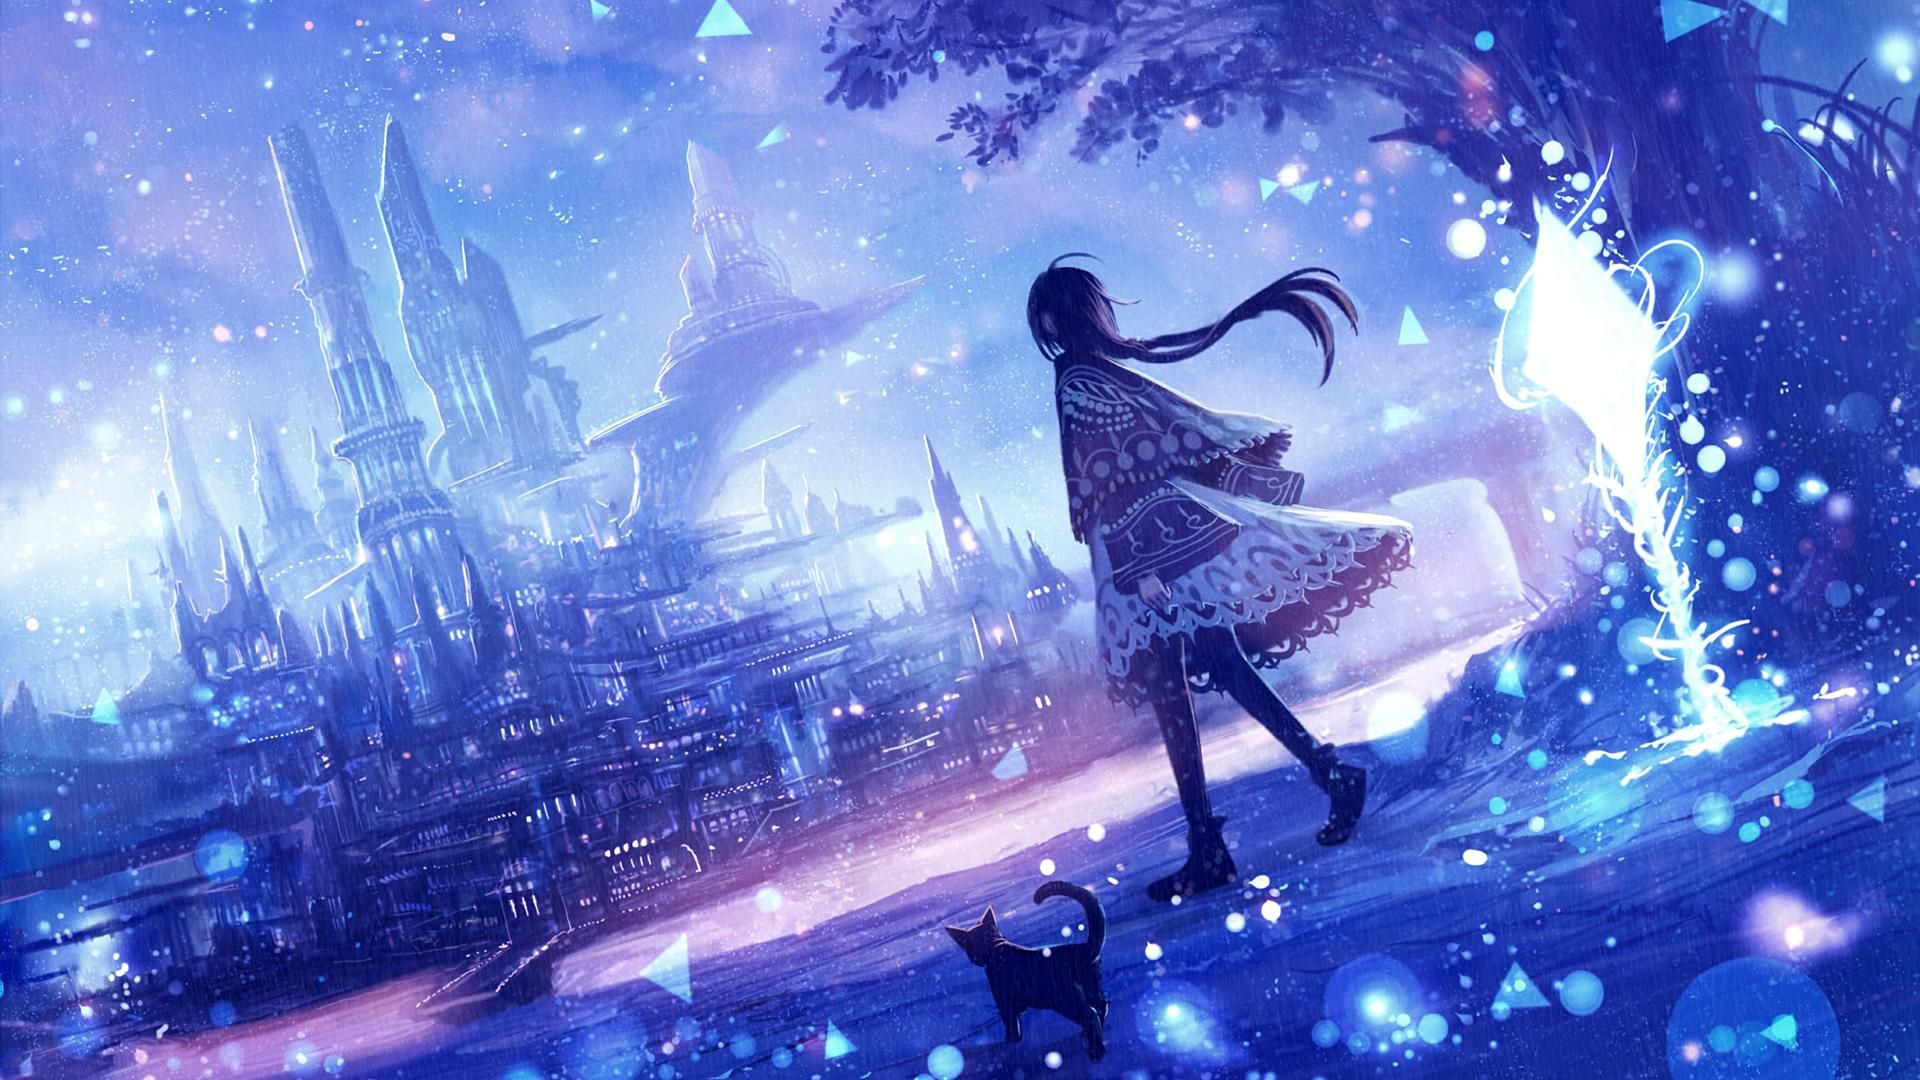 Mystical HD Wallpaper From Gallsource Anime